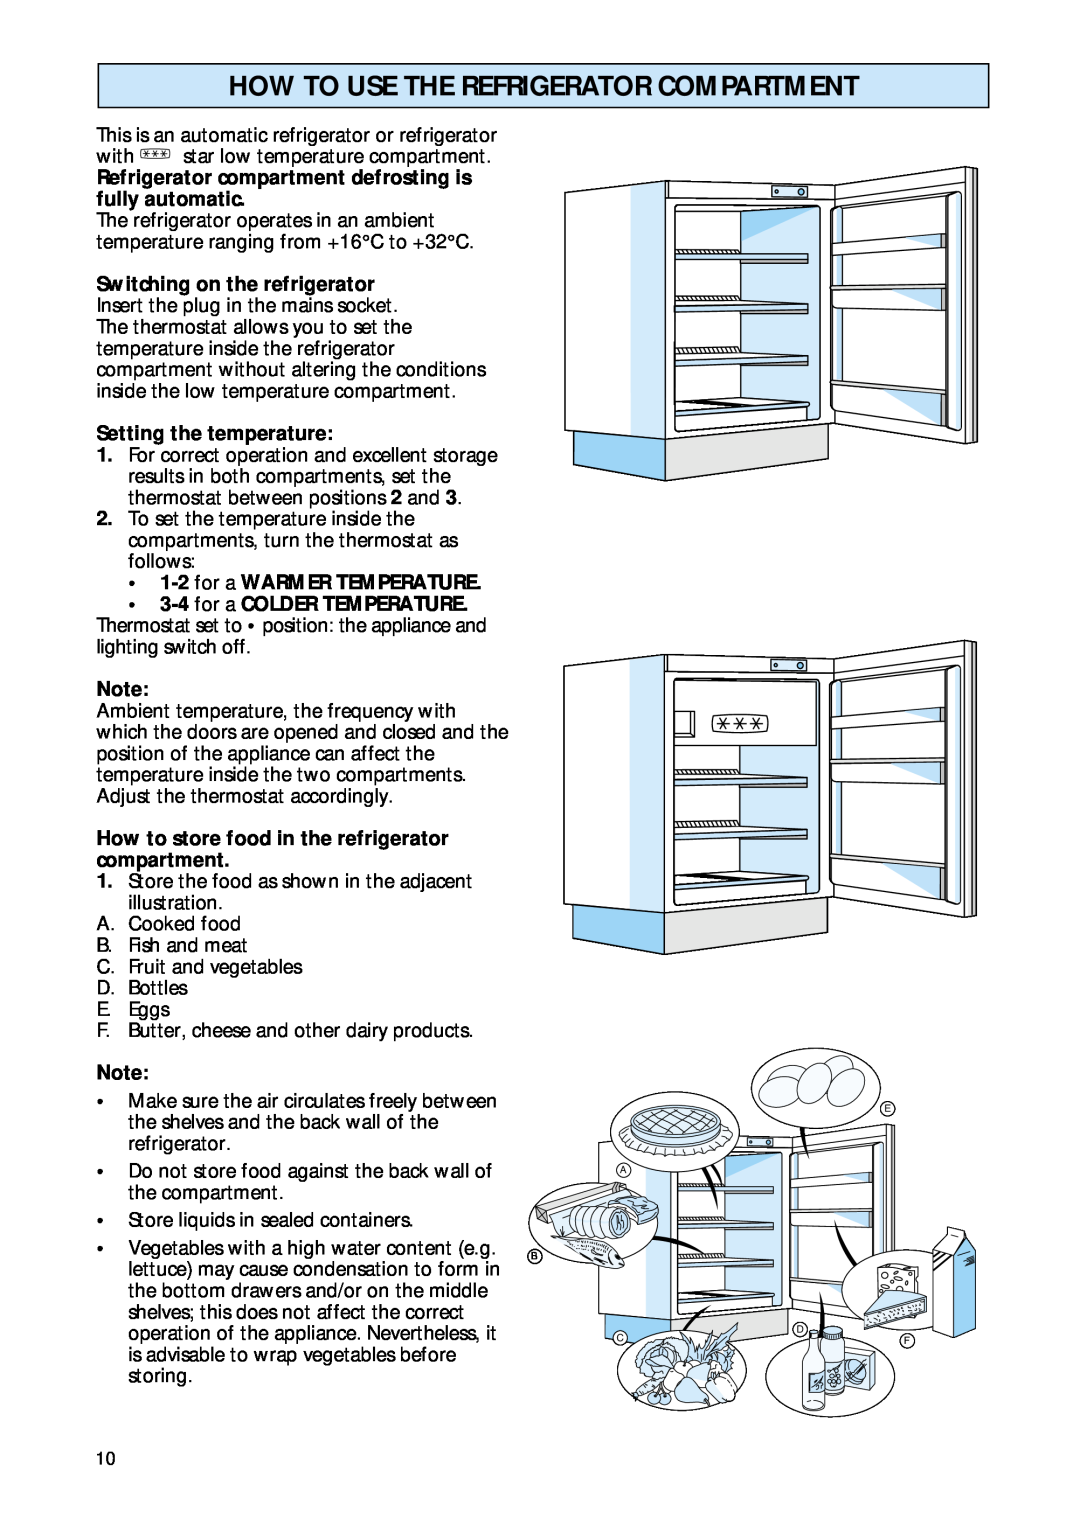 Smeg FR132A Refrigerator compartment defrosting is fully automatic, Setting the temperature, for a WARMER TEMPERATURE 